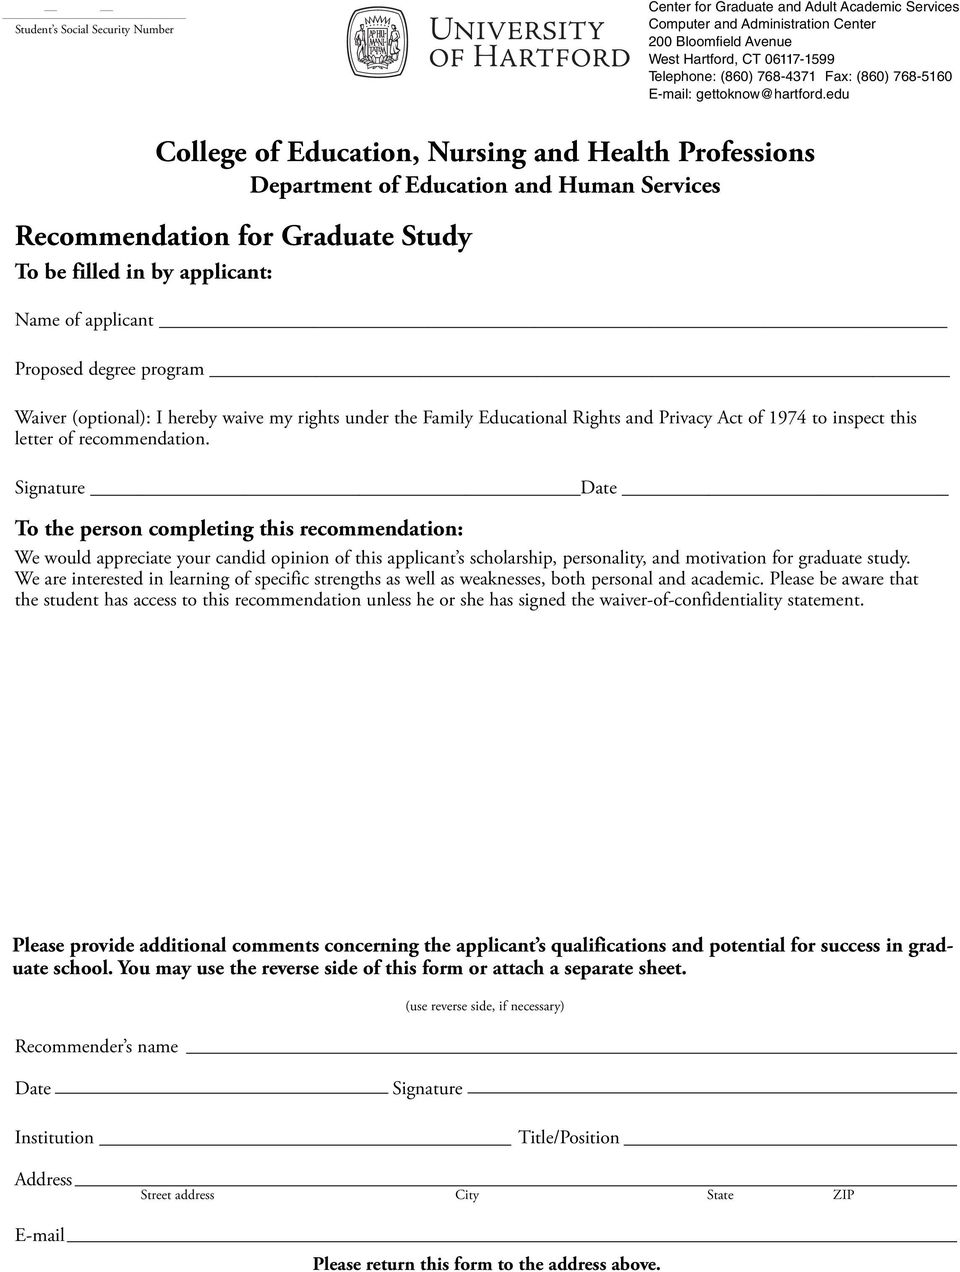 Signature Date To the person completing this recommendation: We would appreciate your candid opinion of this applicant s scholarship, personality, and motivation for graduate study.